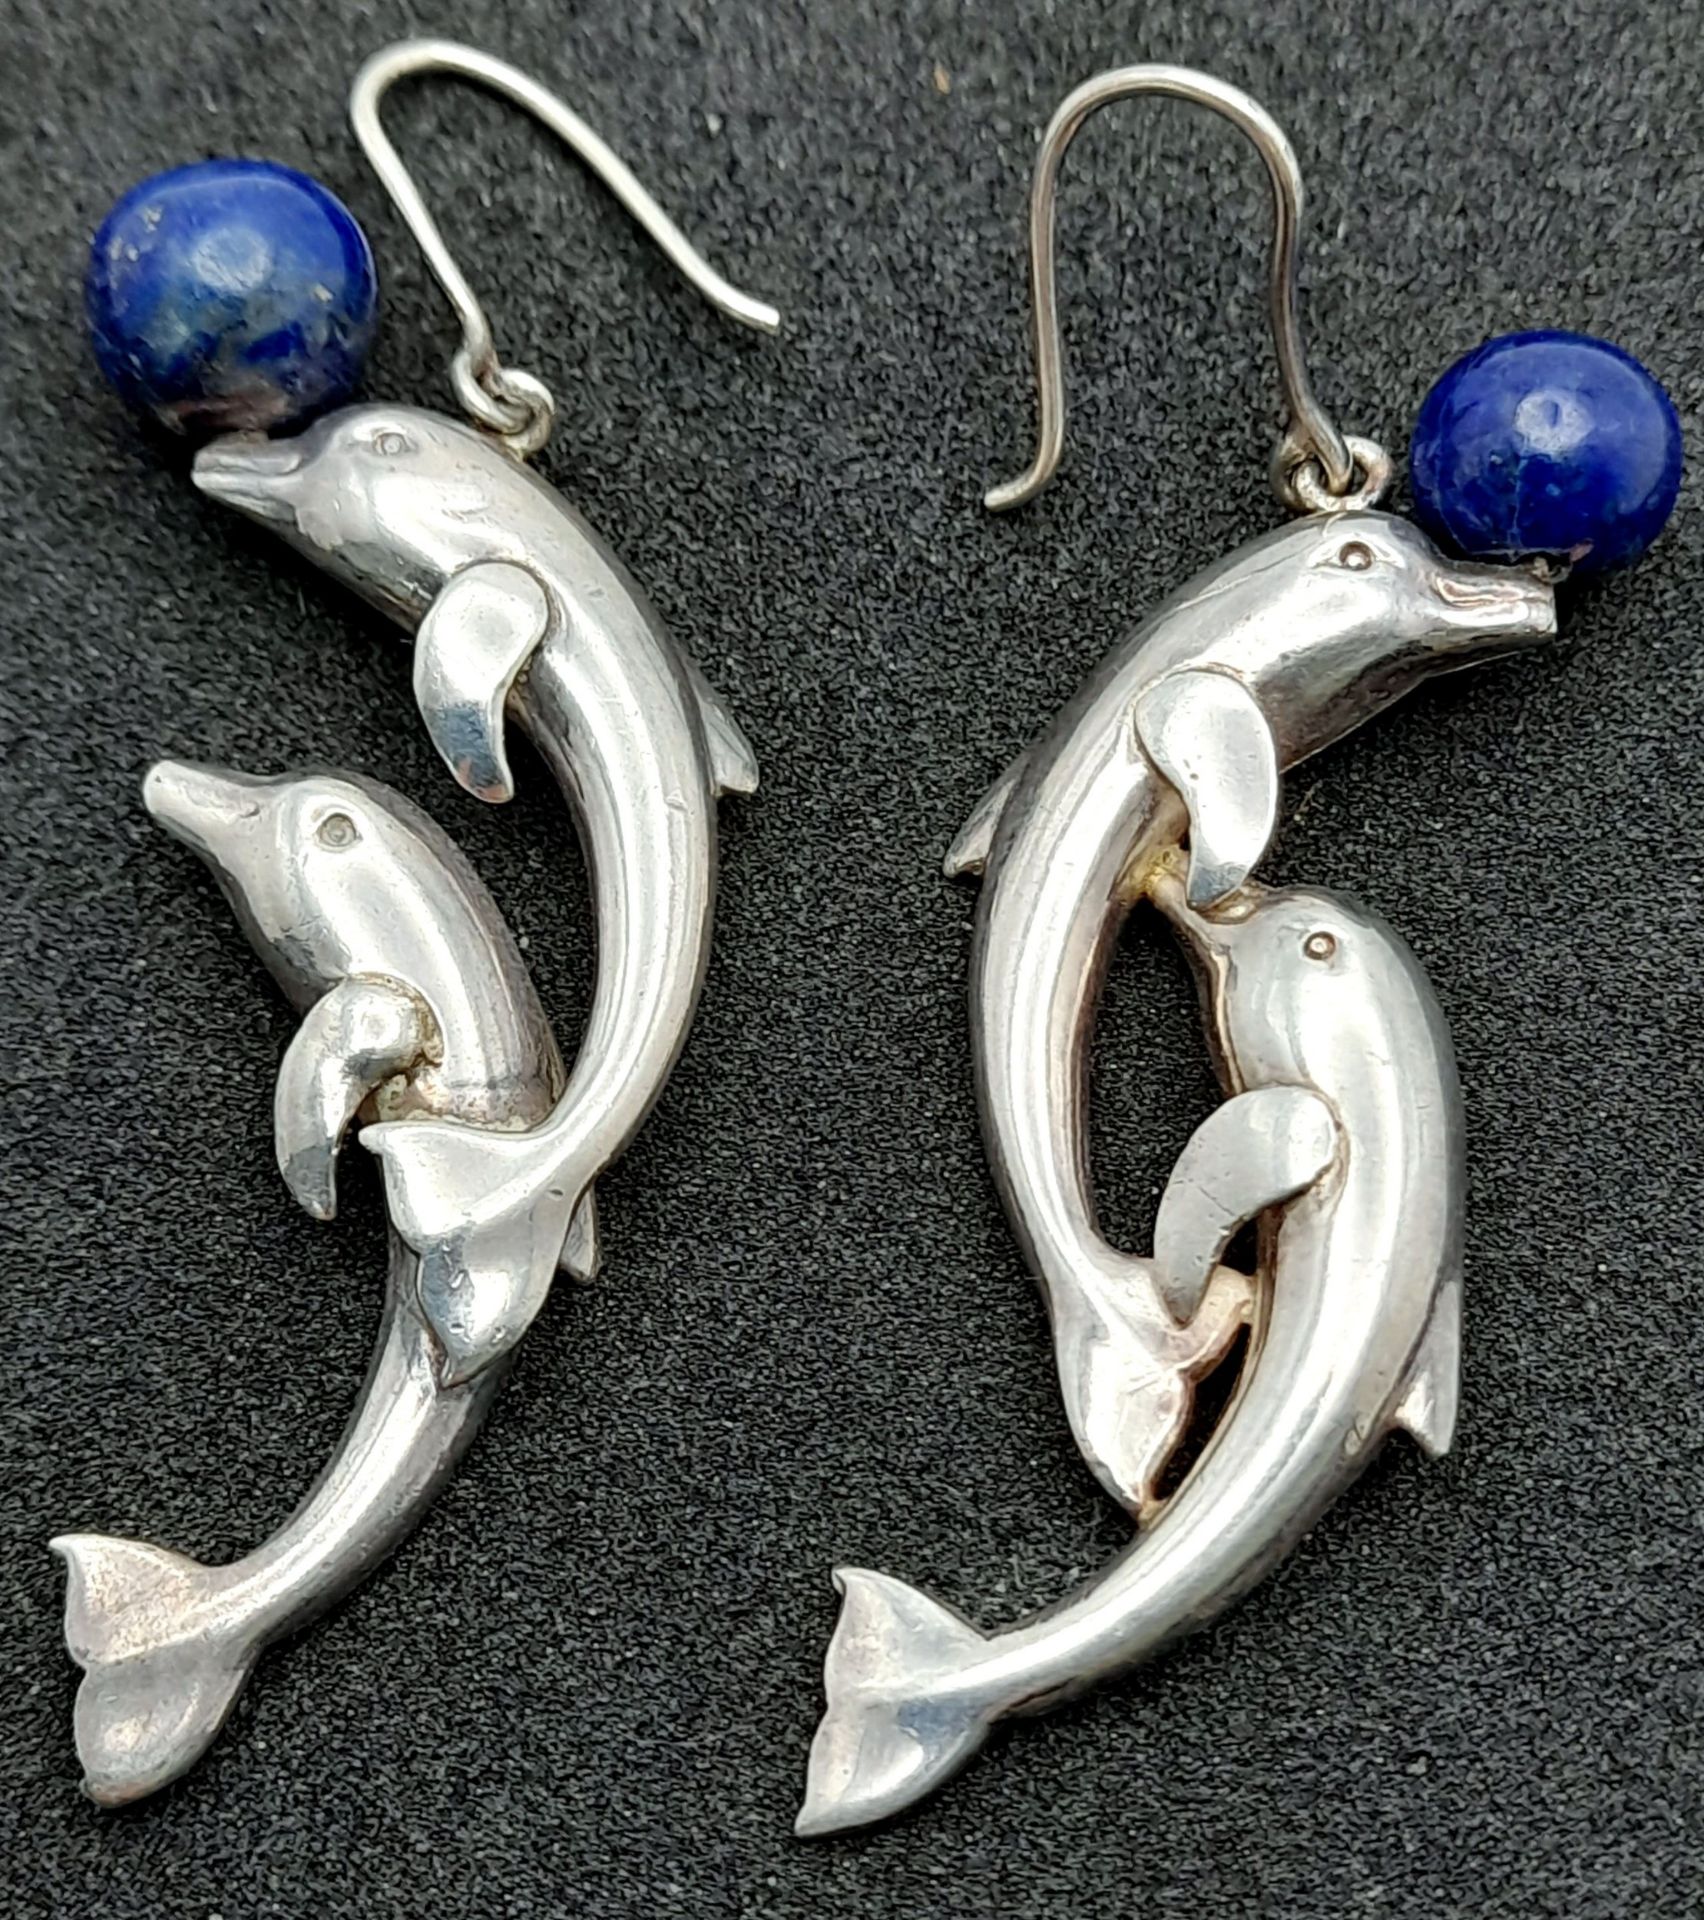 A Pair of Sterling Silver Lapis Lazuli Leaping Dolphin Earrings. 5.5cm Length.